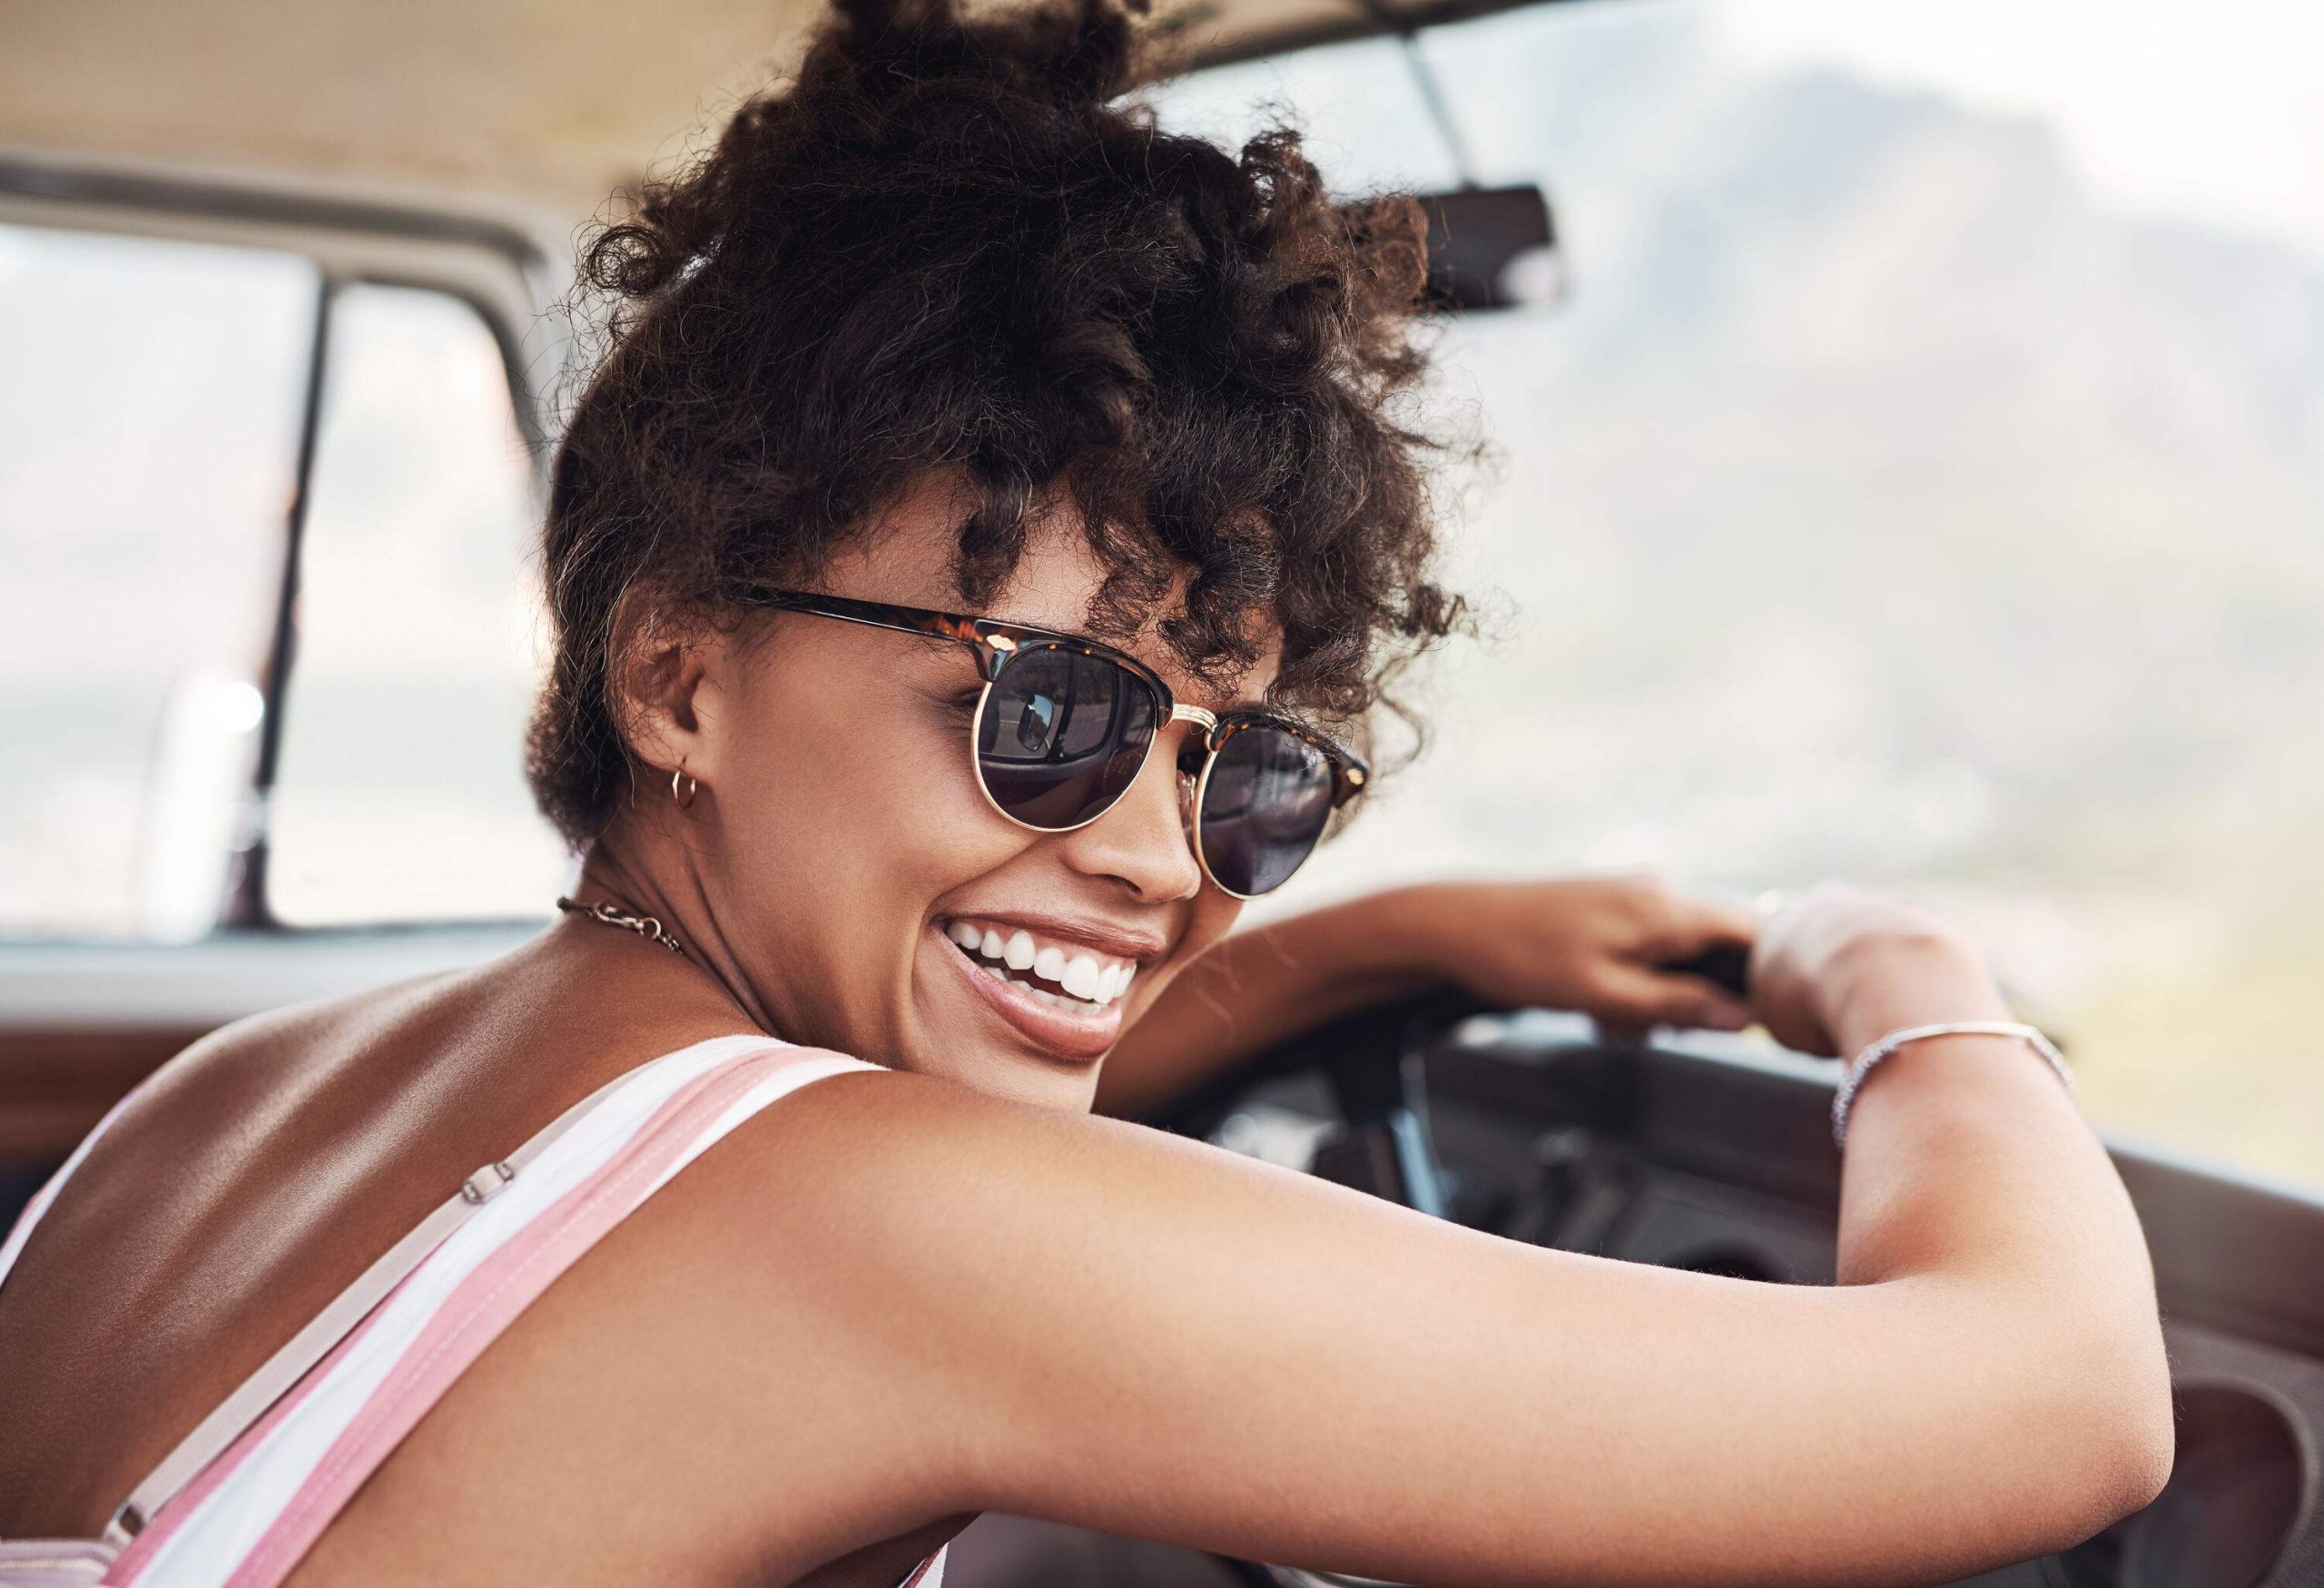 A woman with a beautiful smile leaning against the steering wheel of her car.